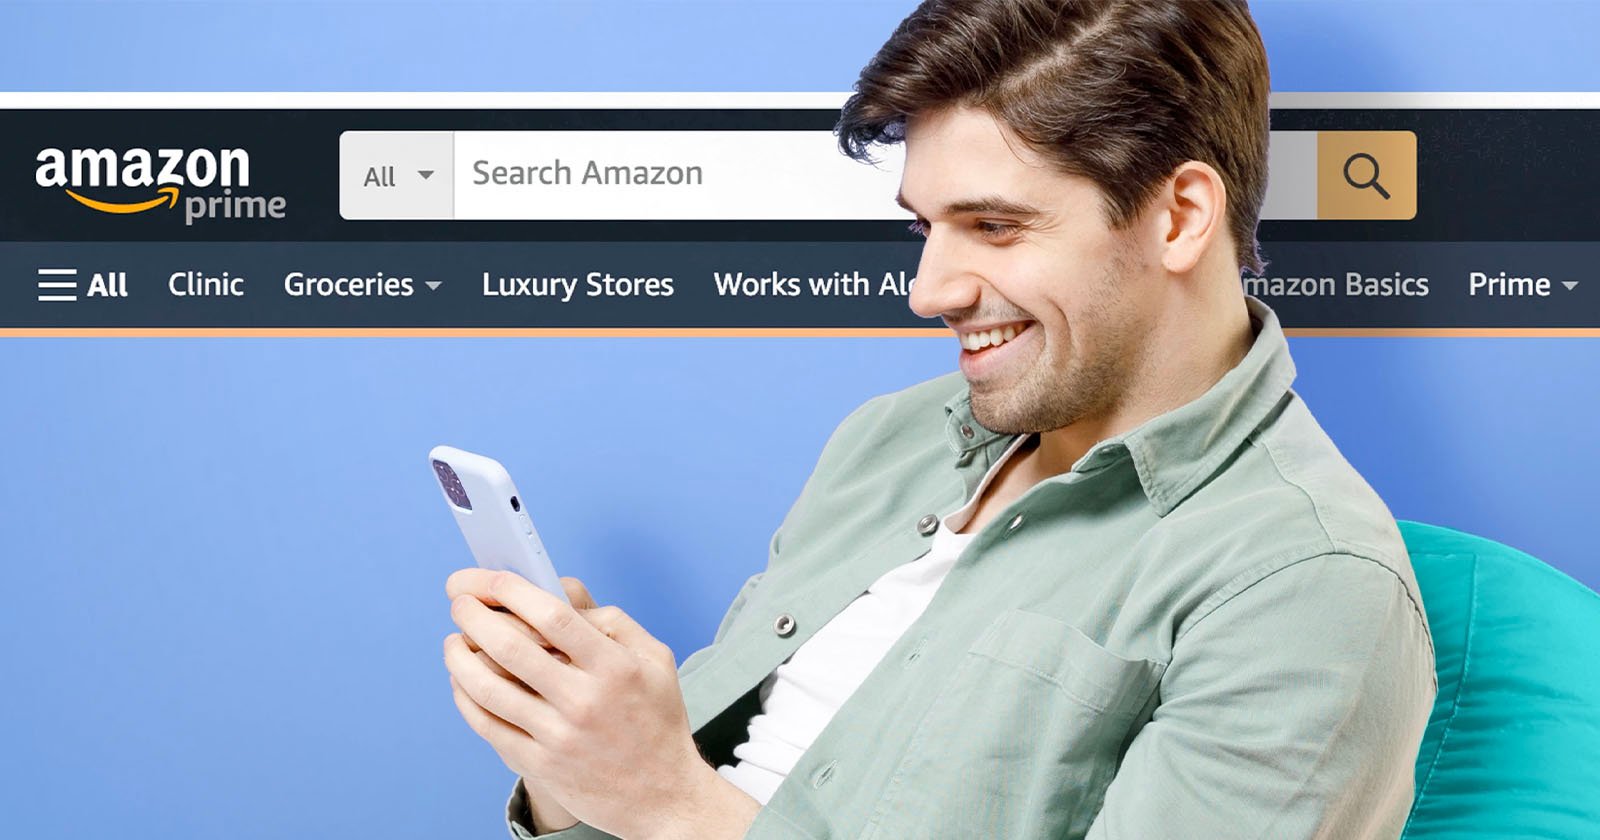 Amazon Now Lets You Search for Products Seen in Photos